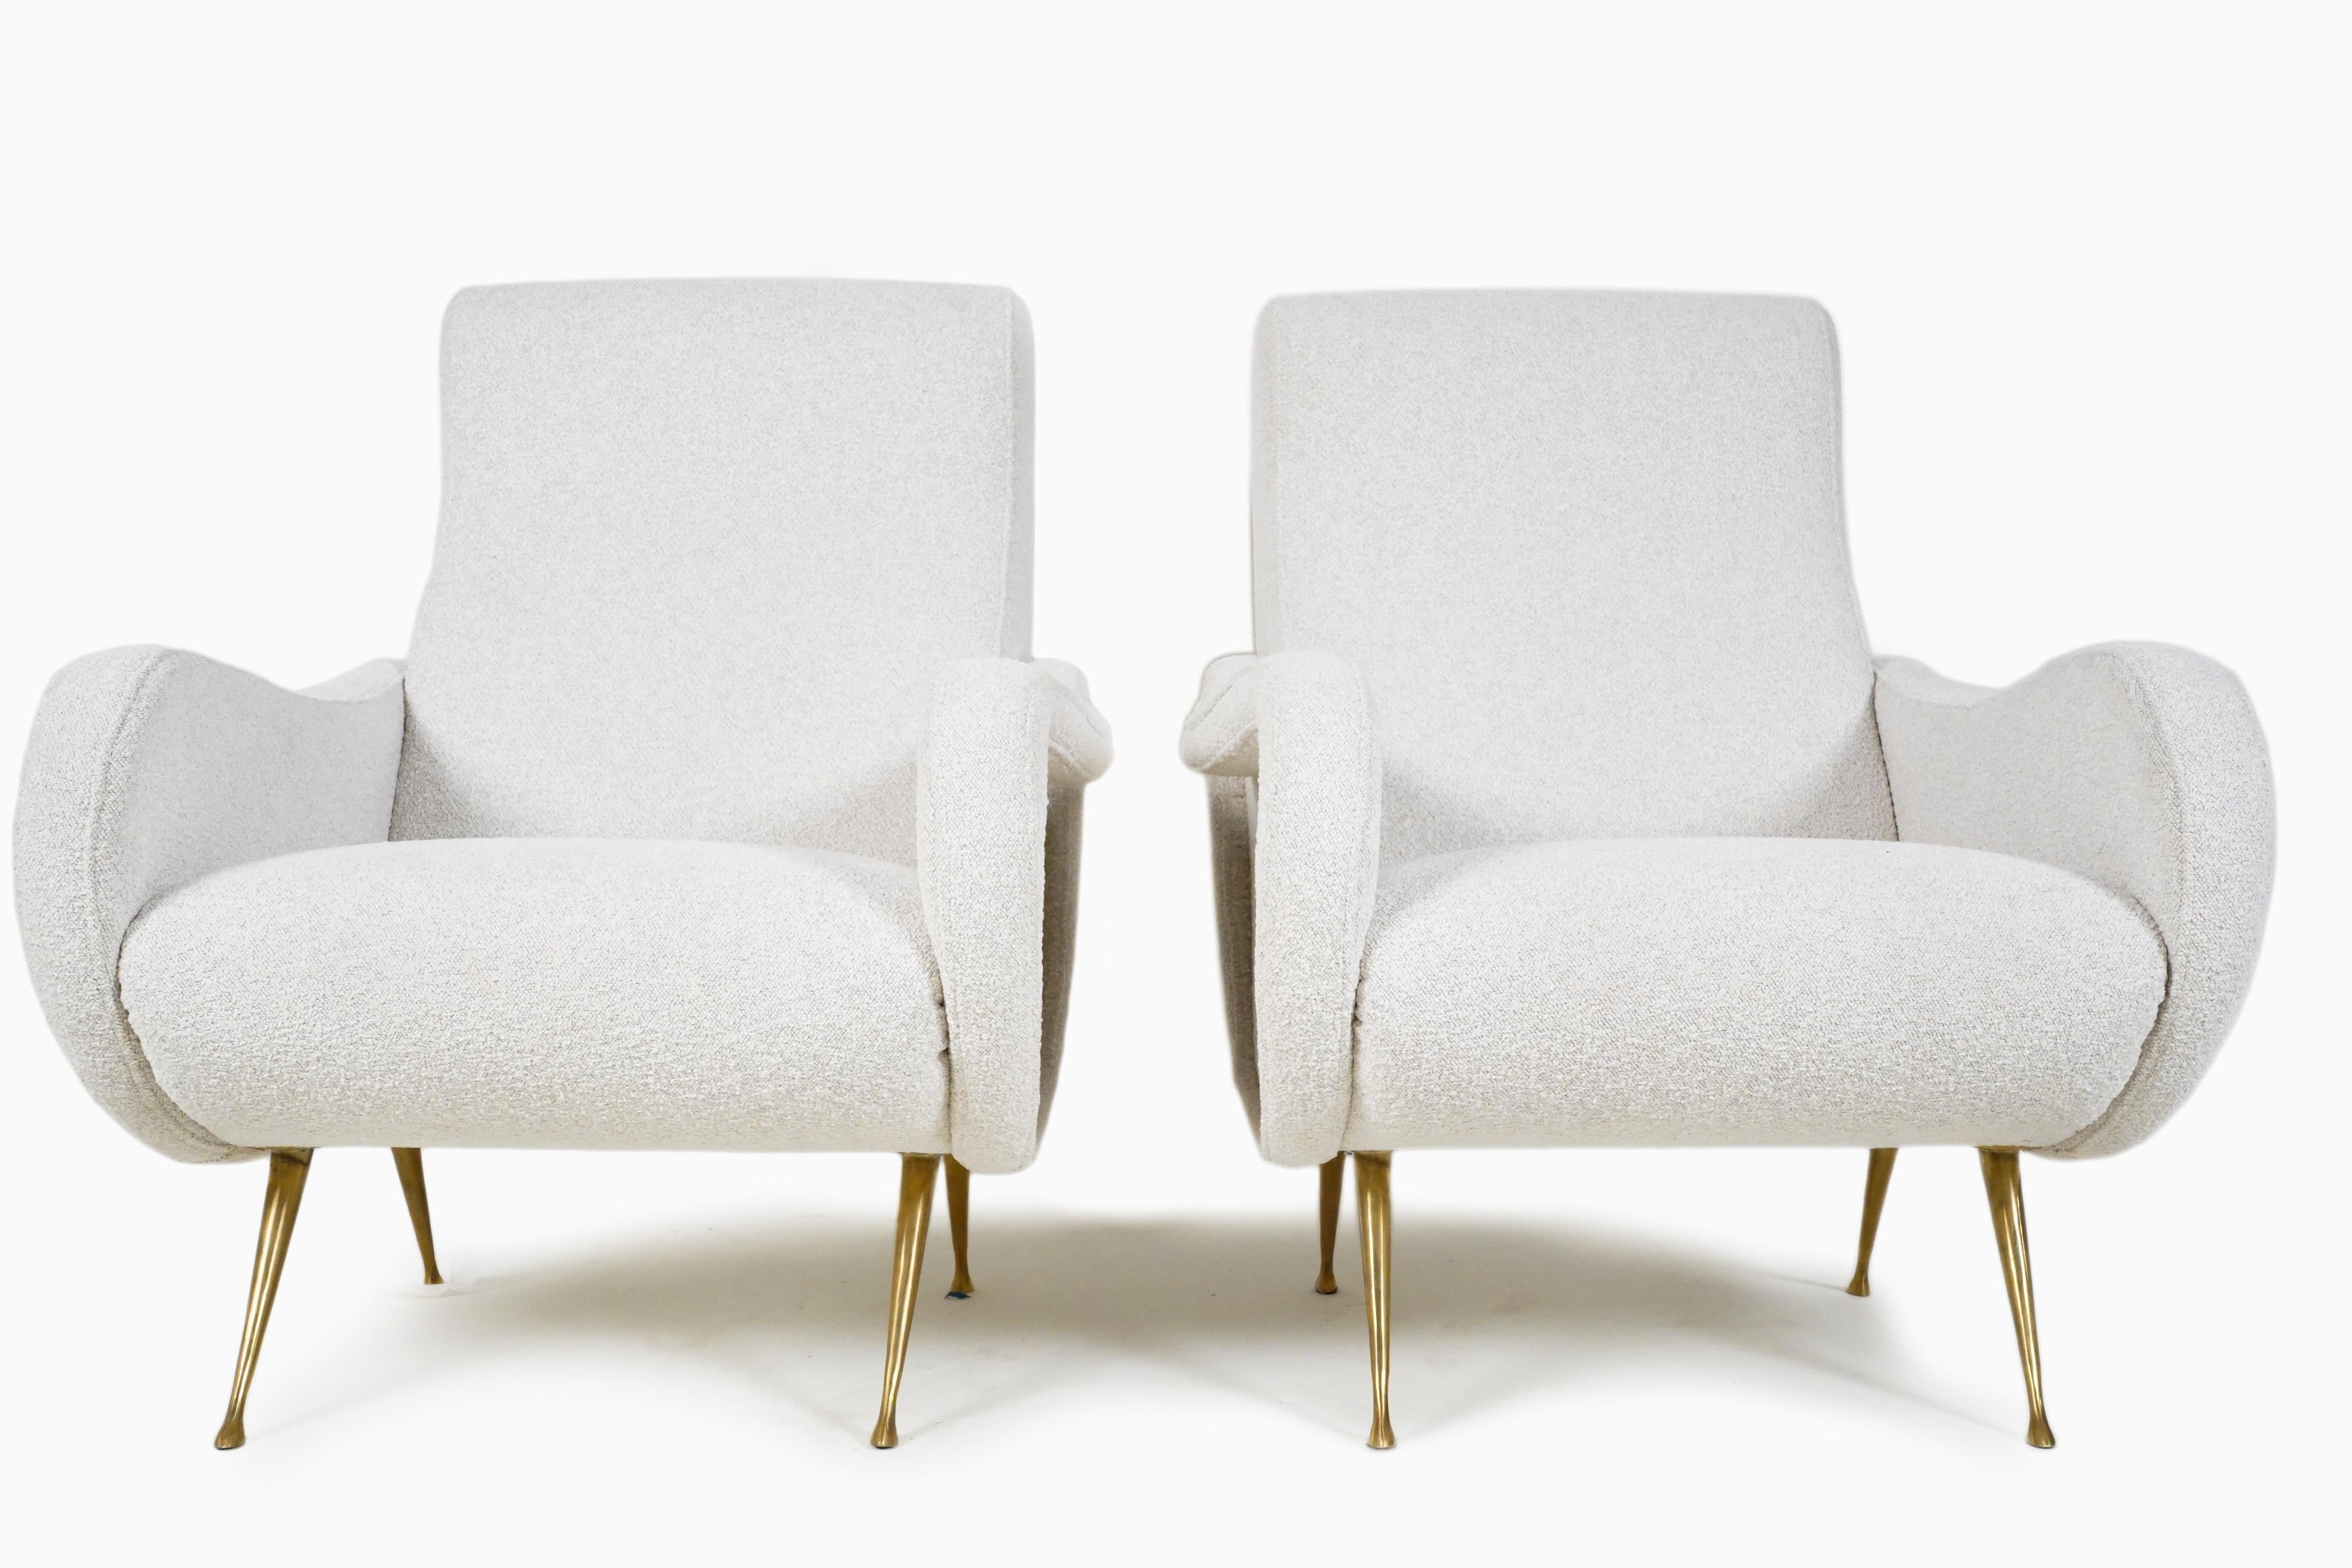 A Classic pair of Italian midcentury lounge chairs in the style of Marco Zanuso's 'Lady Chairs'. The chairs are set upon boldly splayed and tapered solid brass legs. The overall form is sensuous and organic and chairs are a visual treat, as well as